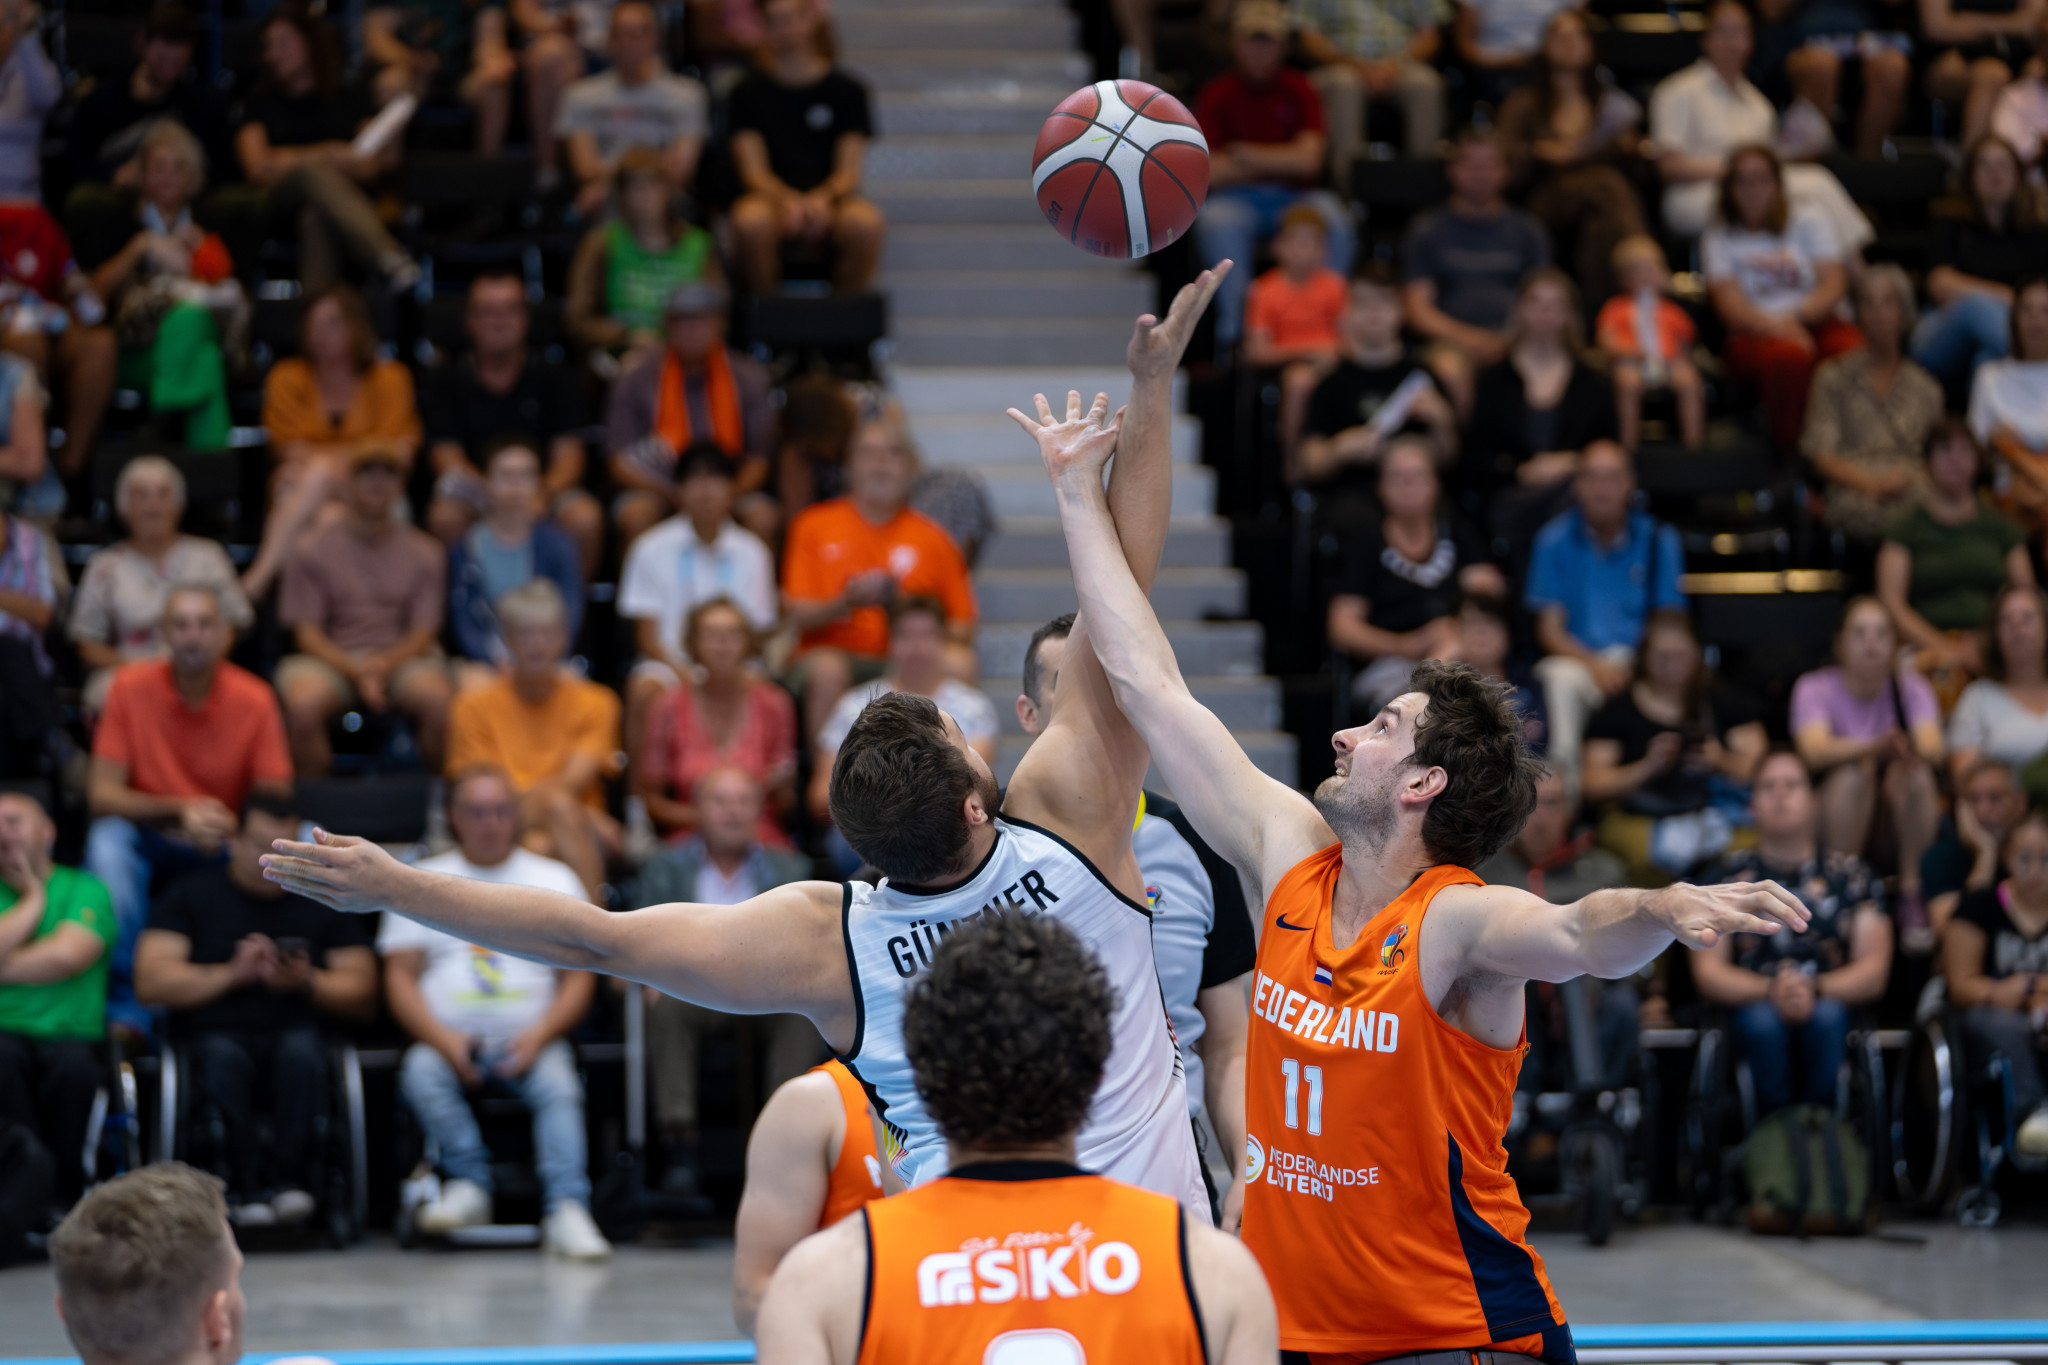 The Netherlands battled it out with Germany for bronze at the Rotterdam Ahoy ©EPC